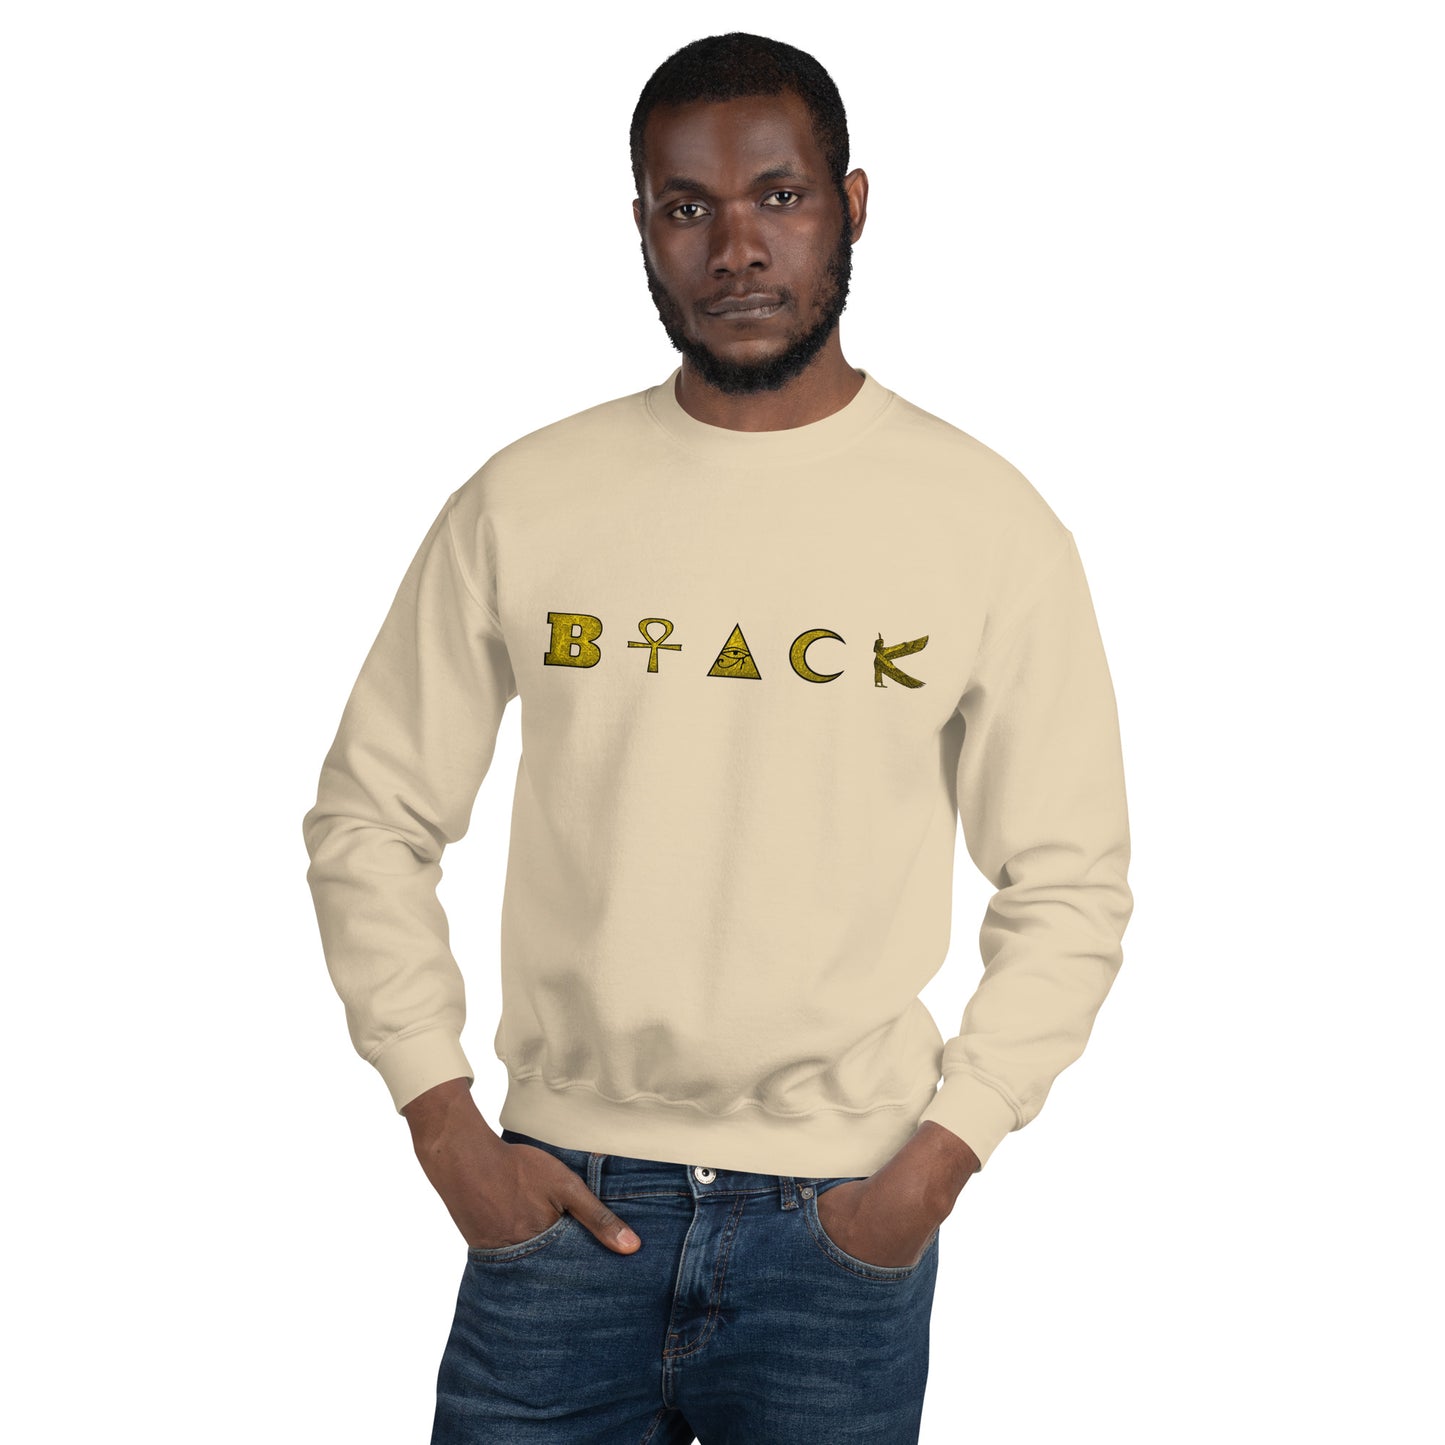 Fall Kemetic Clothing for Black Culture